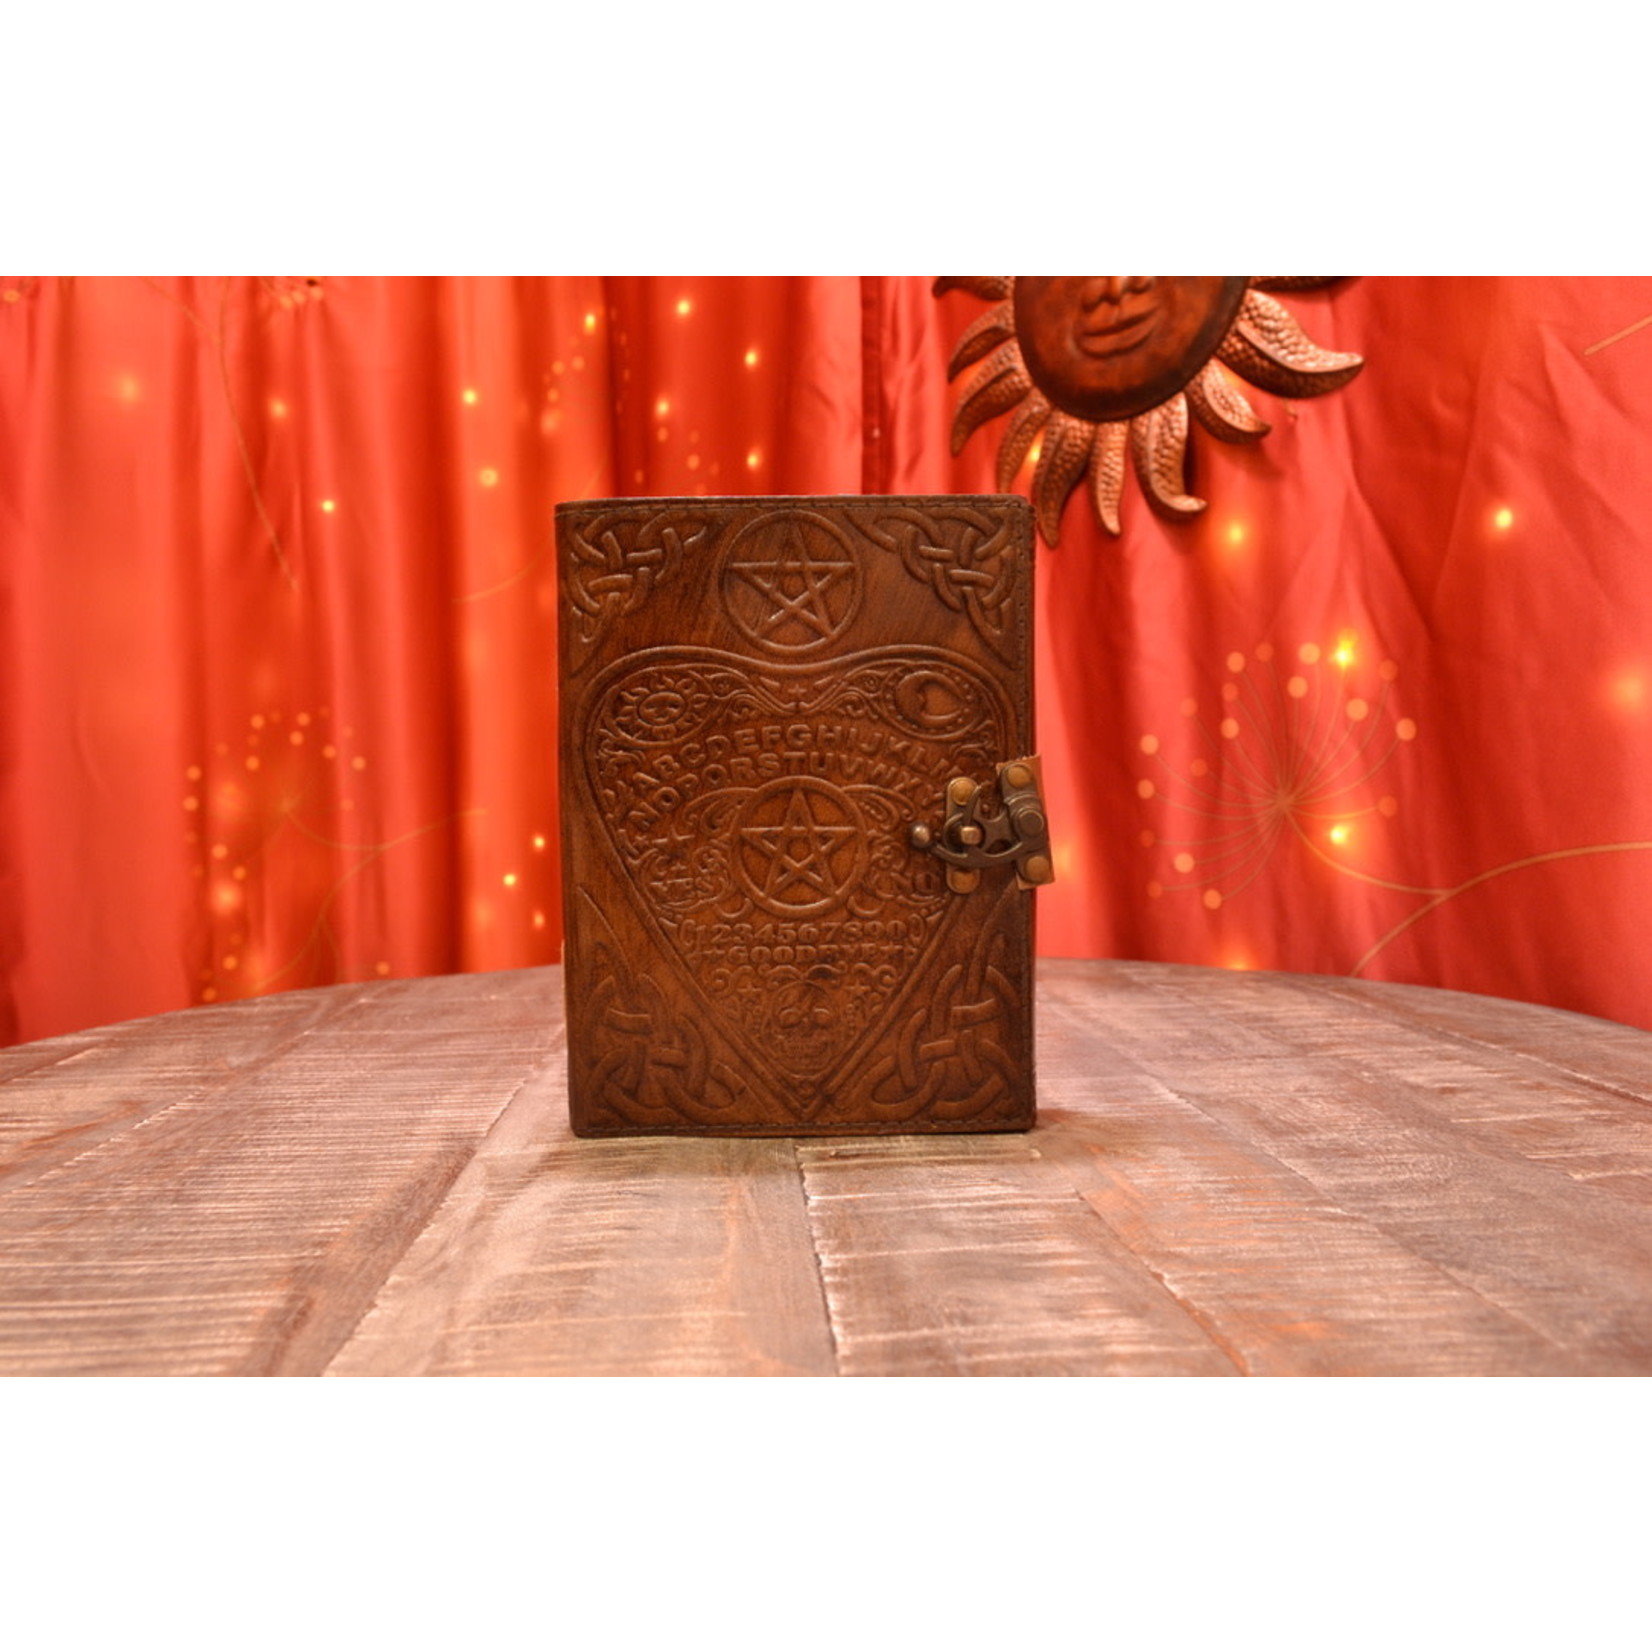 6" x 8" Planchette Embossed Leather Journal, Latch Closure